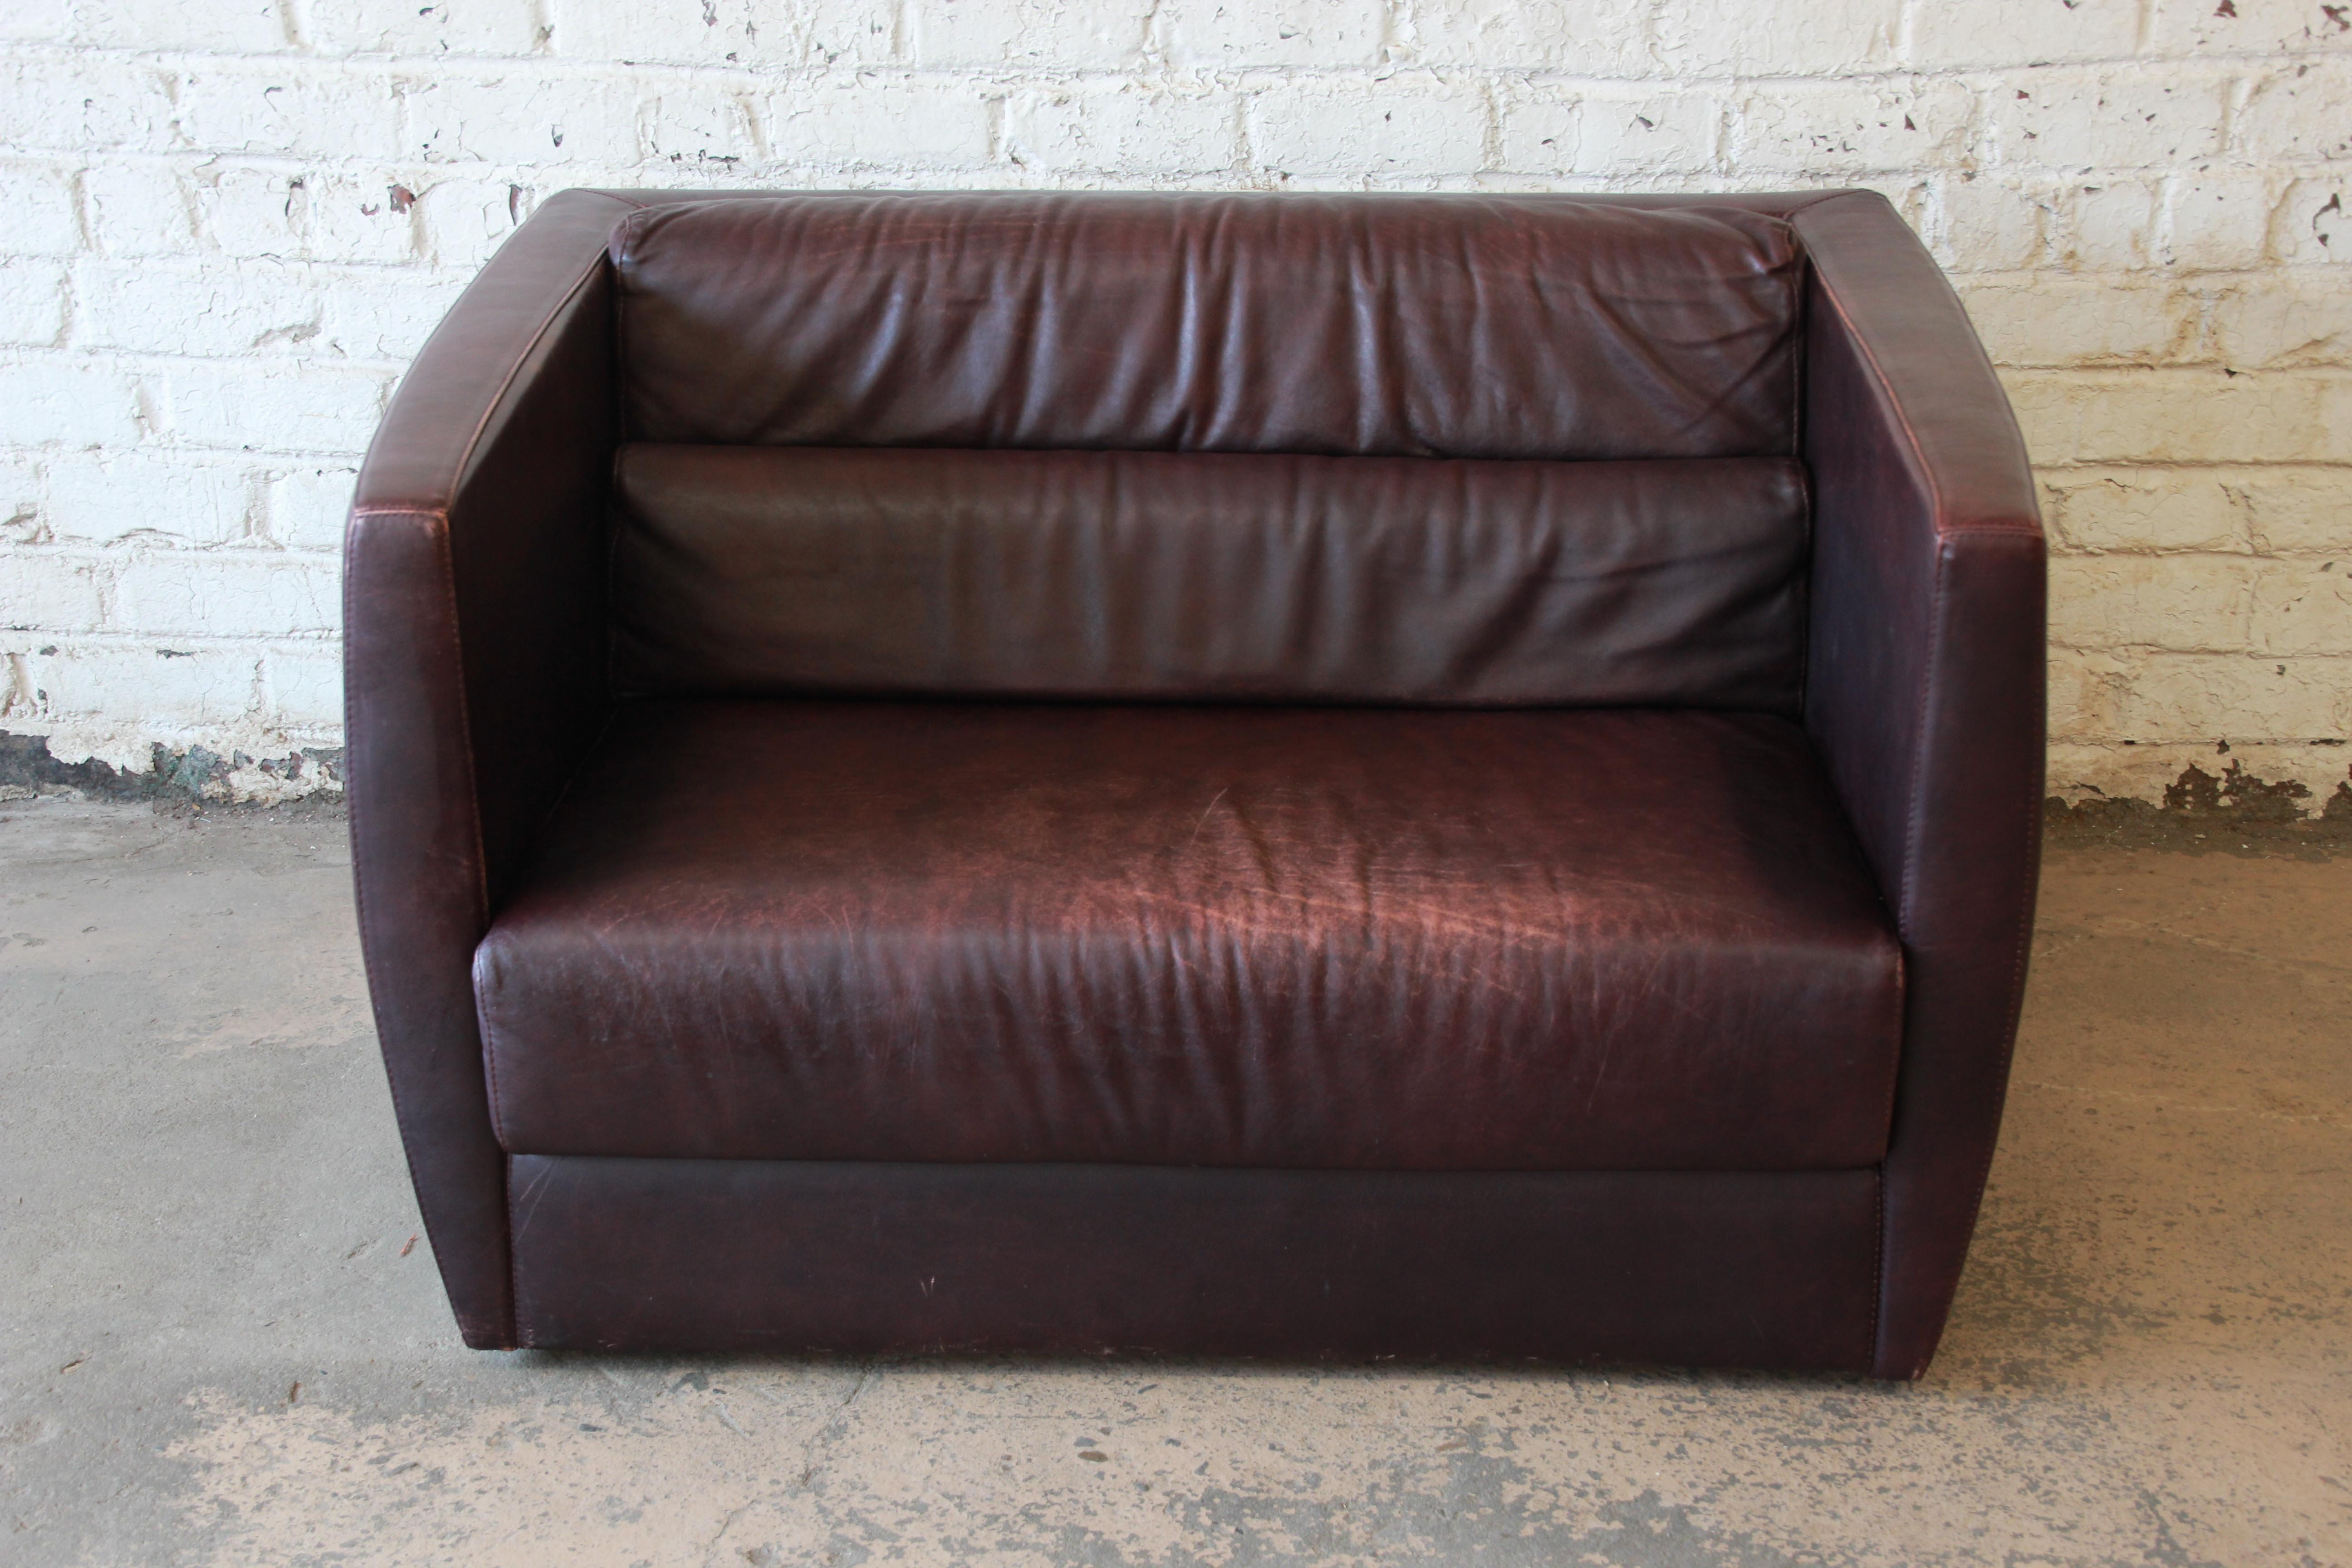 An exceptional Bauhaus style leather love seat or oversized chair by Roche Bobois. The love seat features gorgeous high-end leather in a deep burgundy, with a nice patina that only adds to the character and age of the piece. It has a sleek and